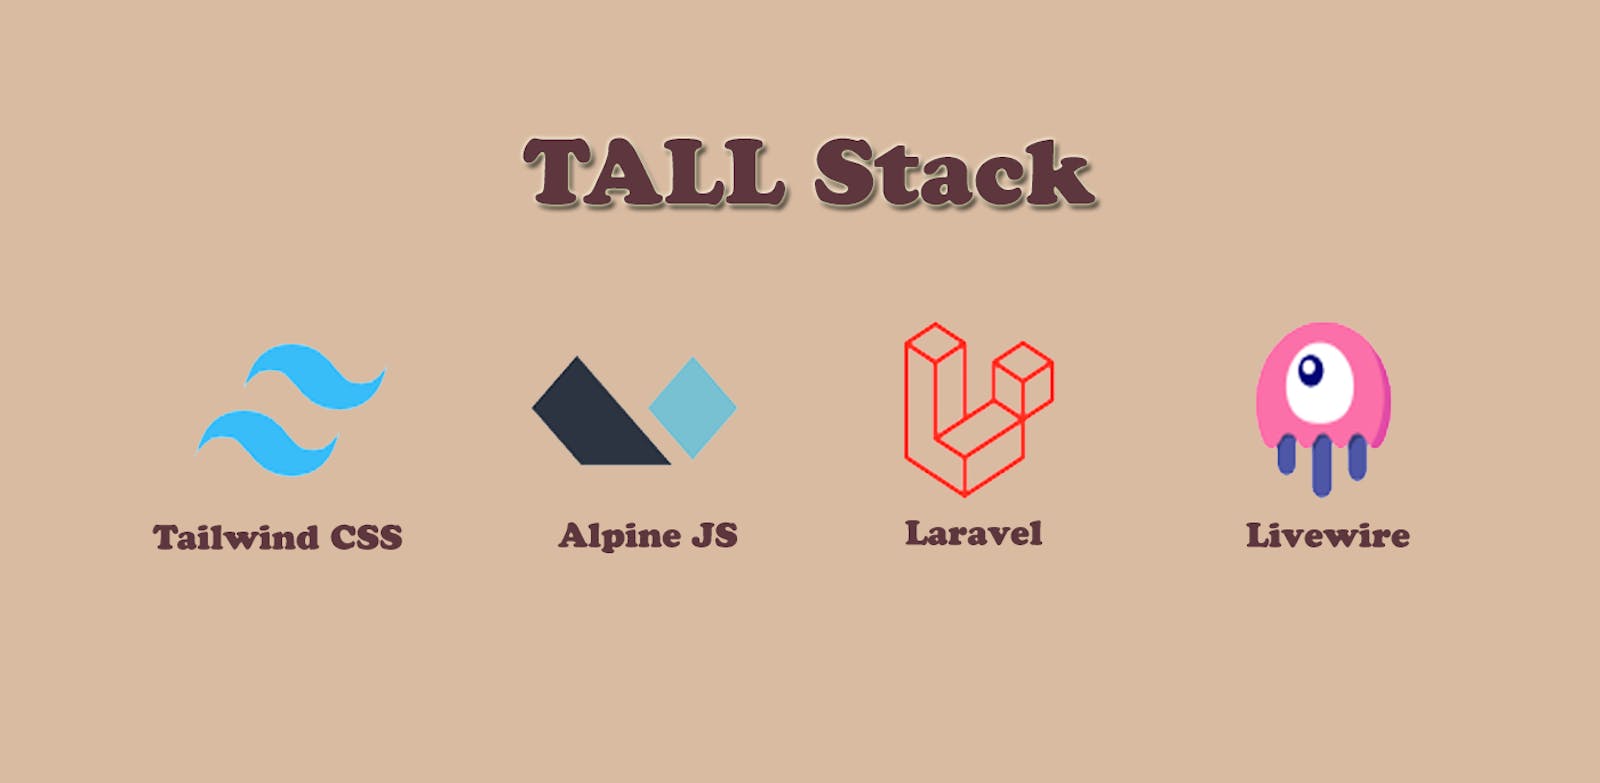 You should be aware of TALL Stack and it’s resources